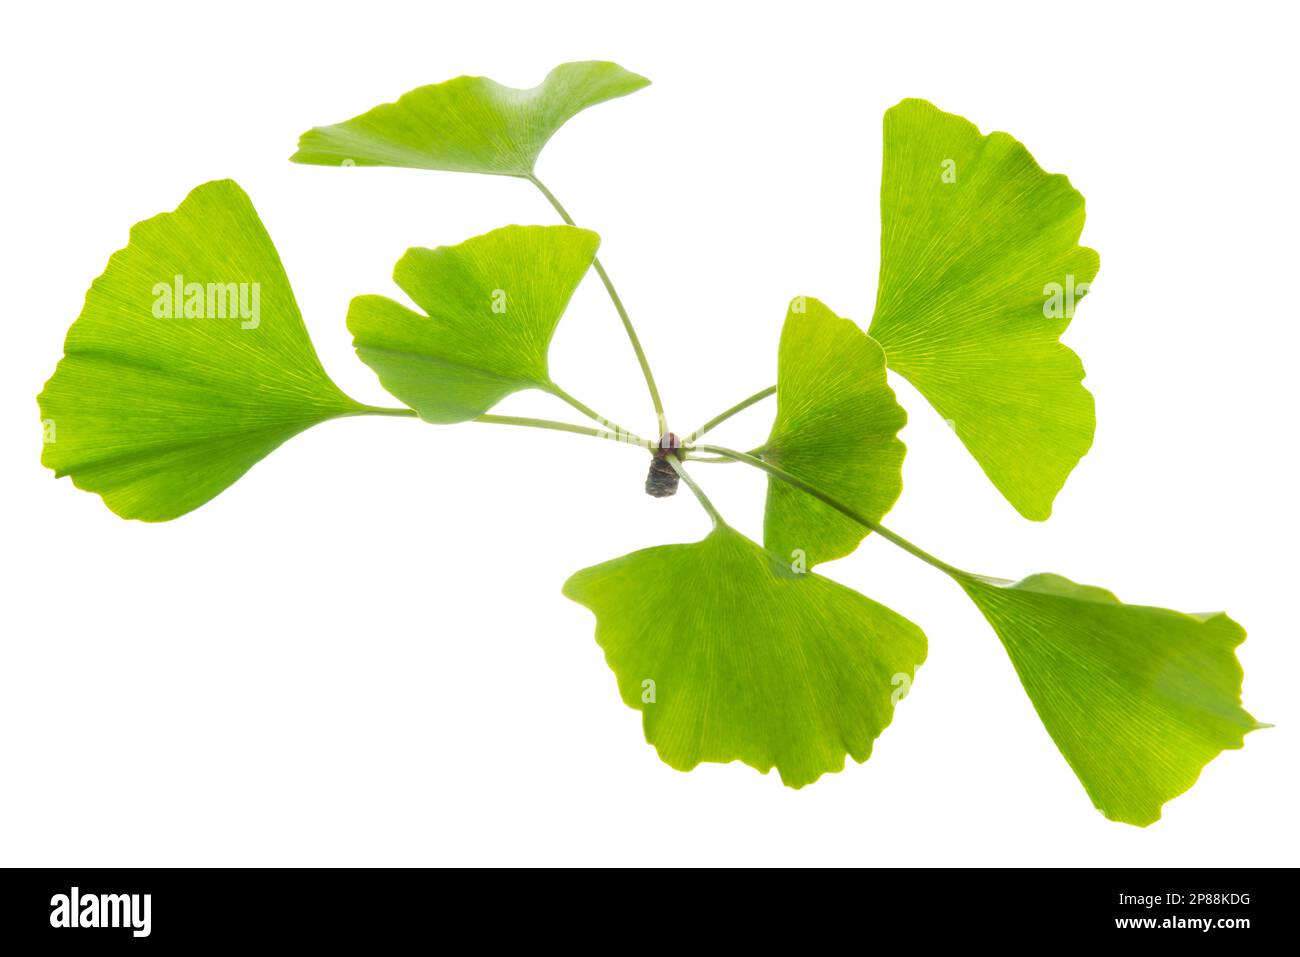 Ginkgo biloba green leaves is isolated on white background. Stock Photo